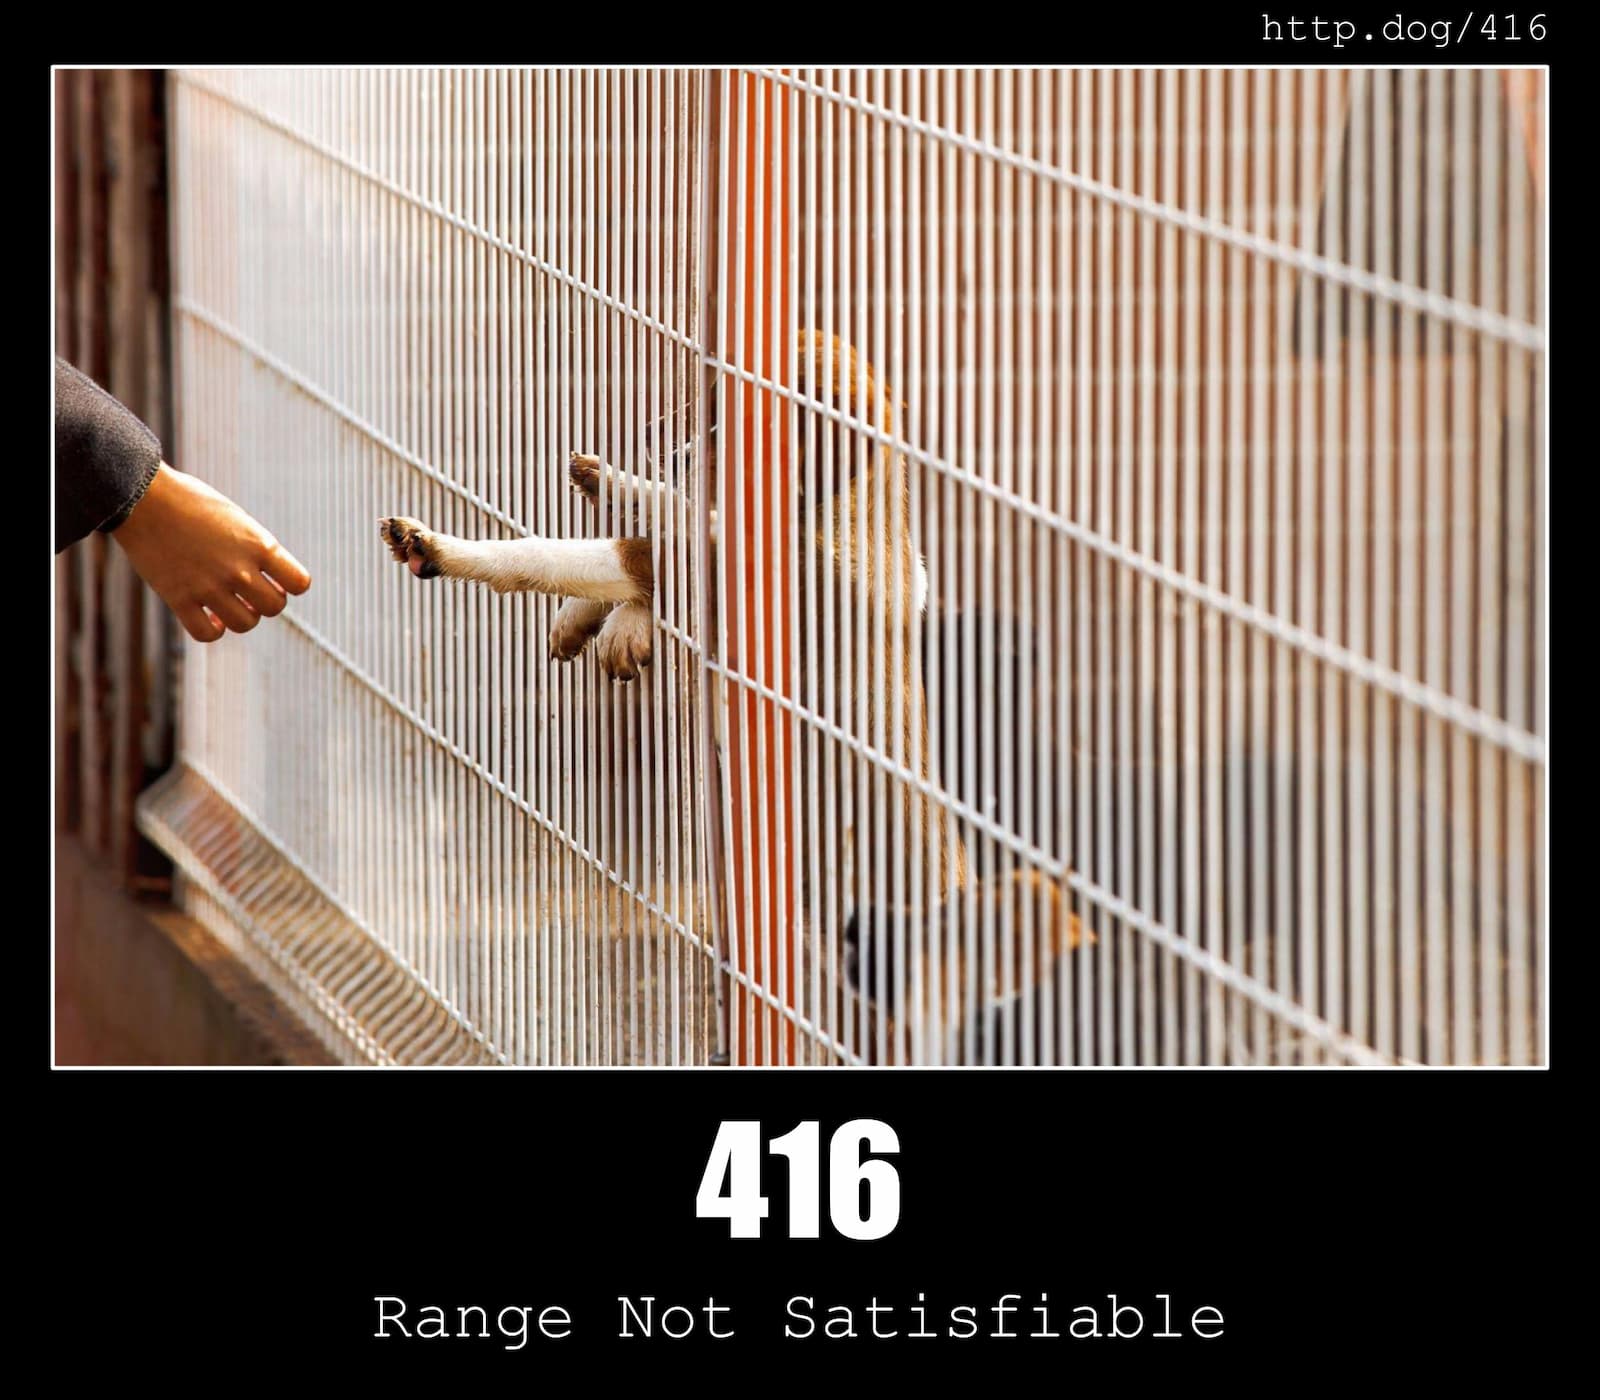 HTTP Status Code 416 Range Not Satisfiable & Dogs